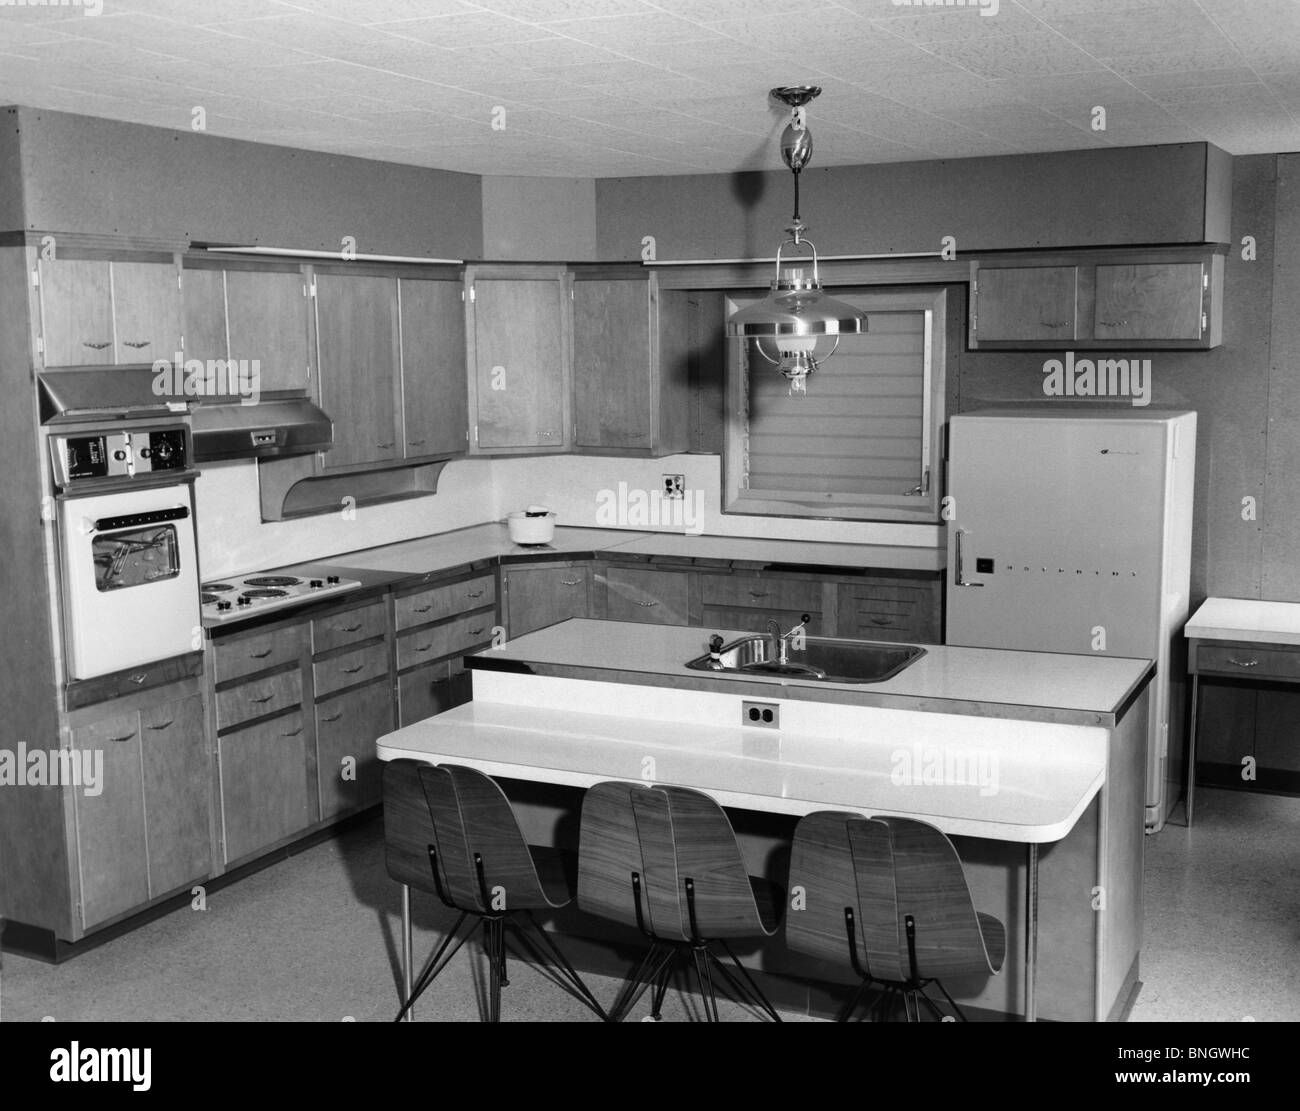 Interior of kitchen in 1950s style Stock Photo